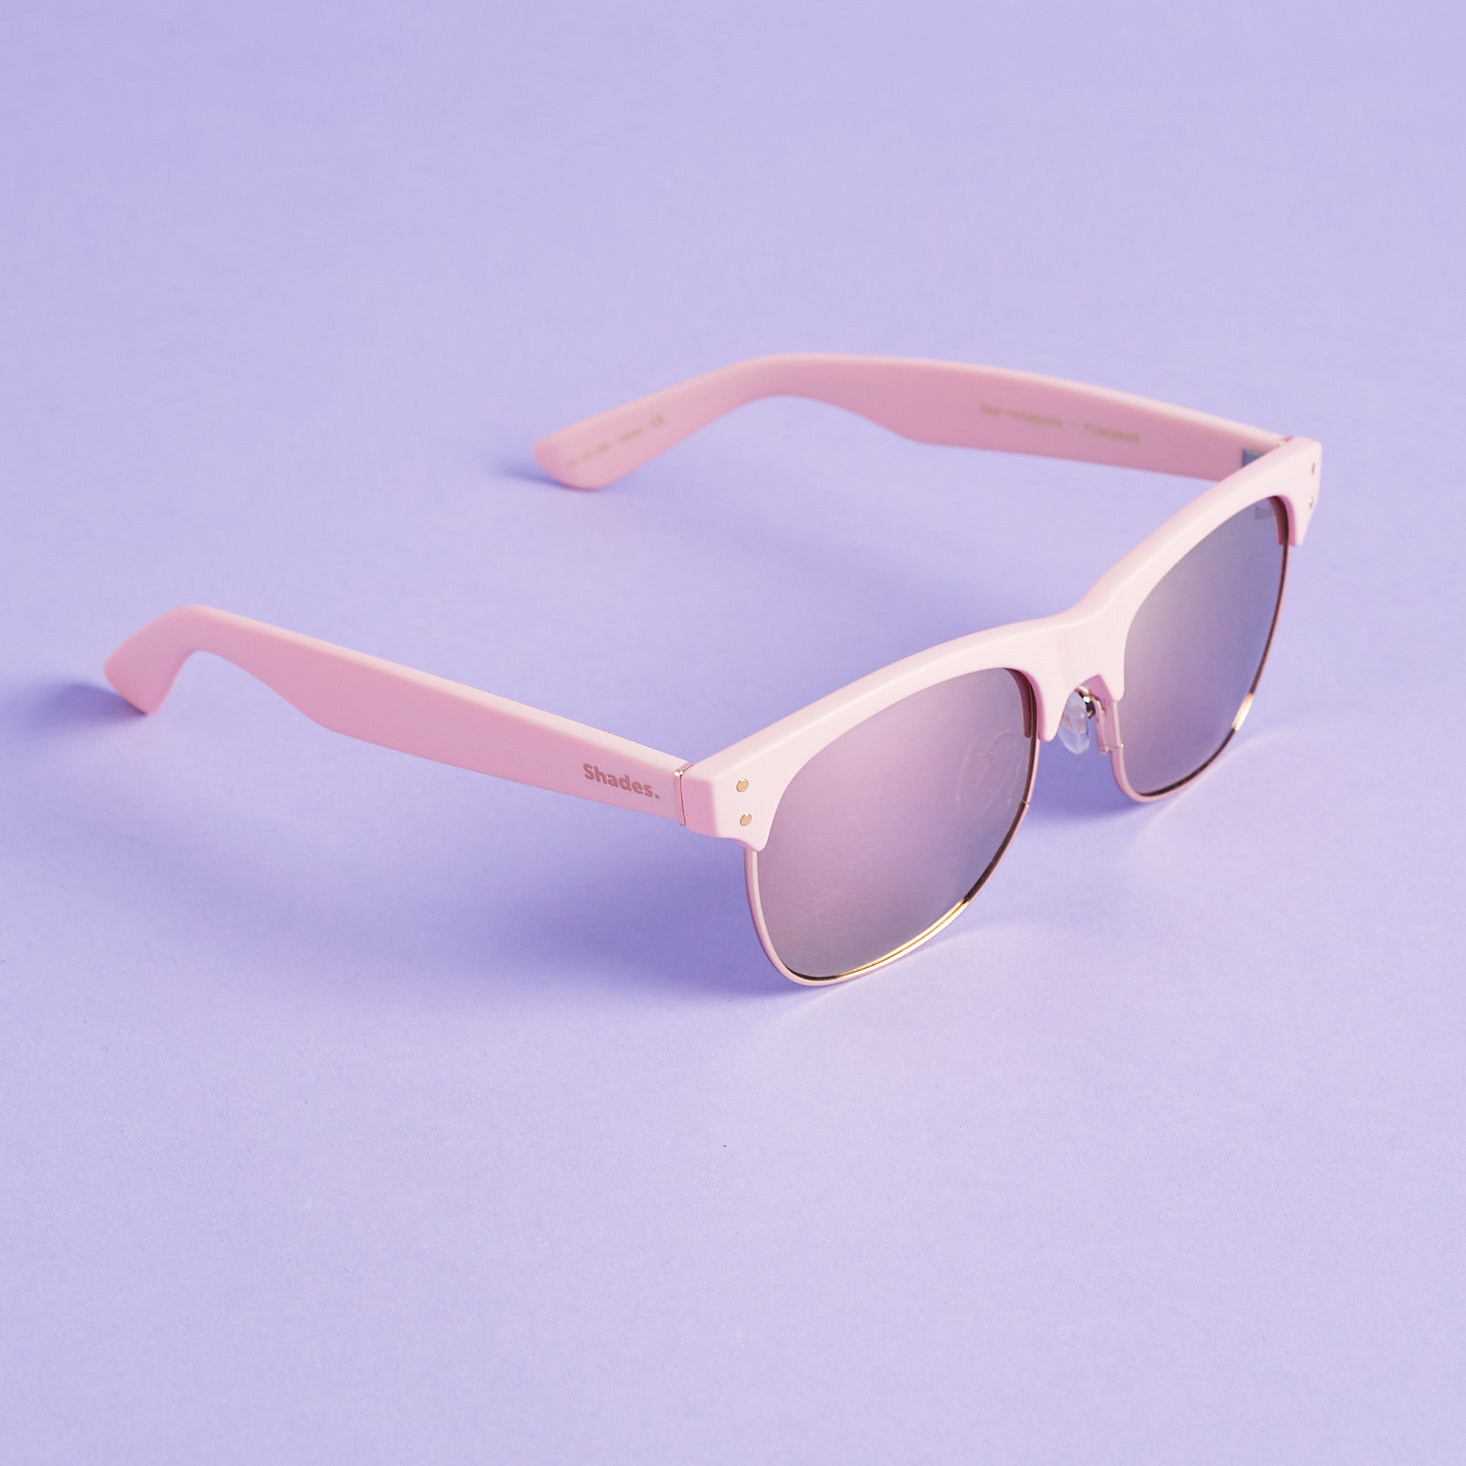 Pink Shades Club sunglasses - right side